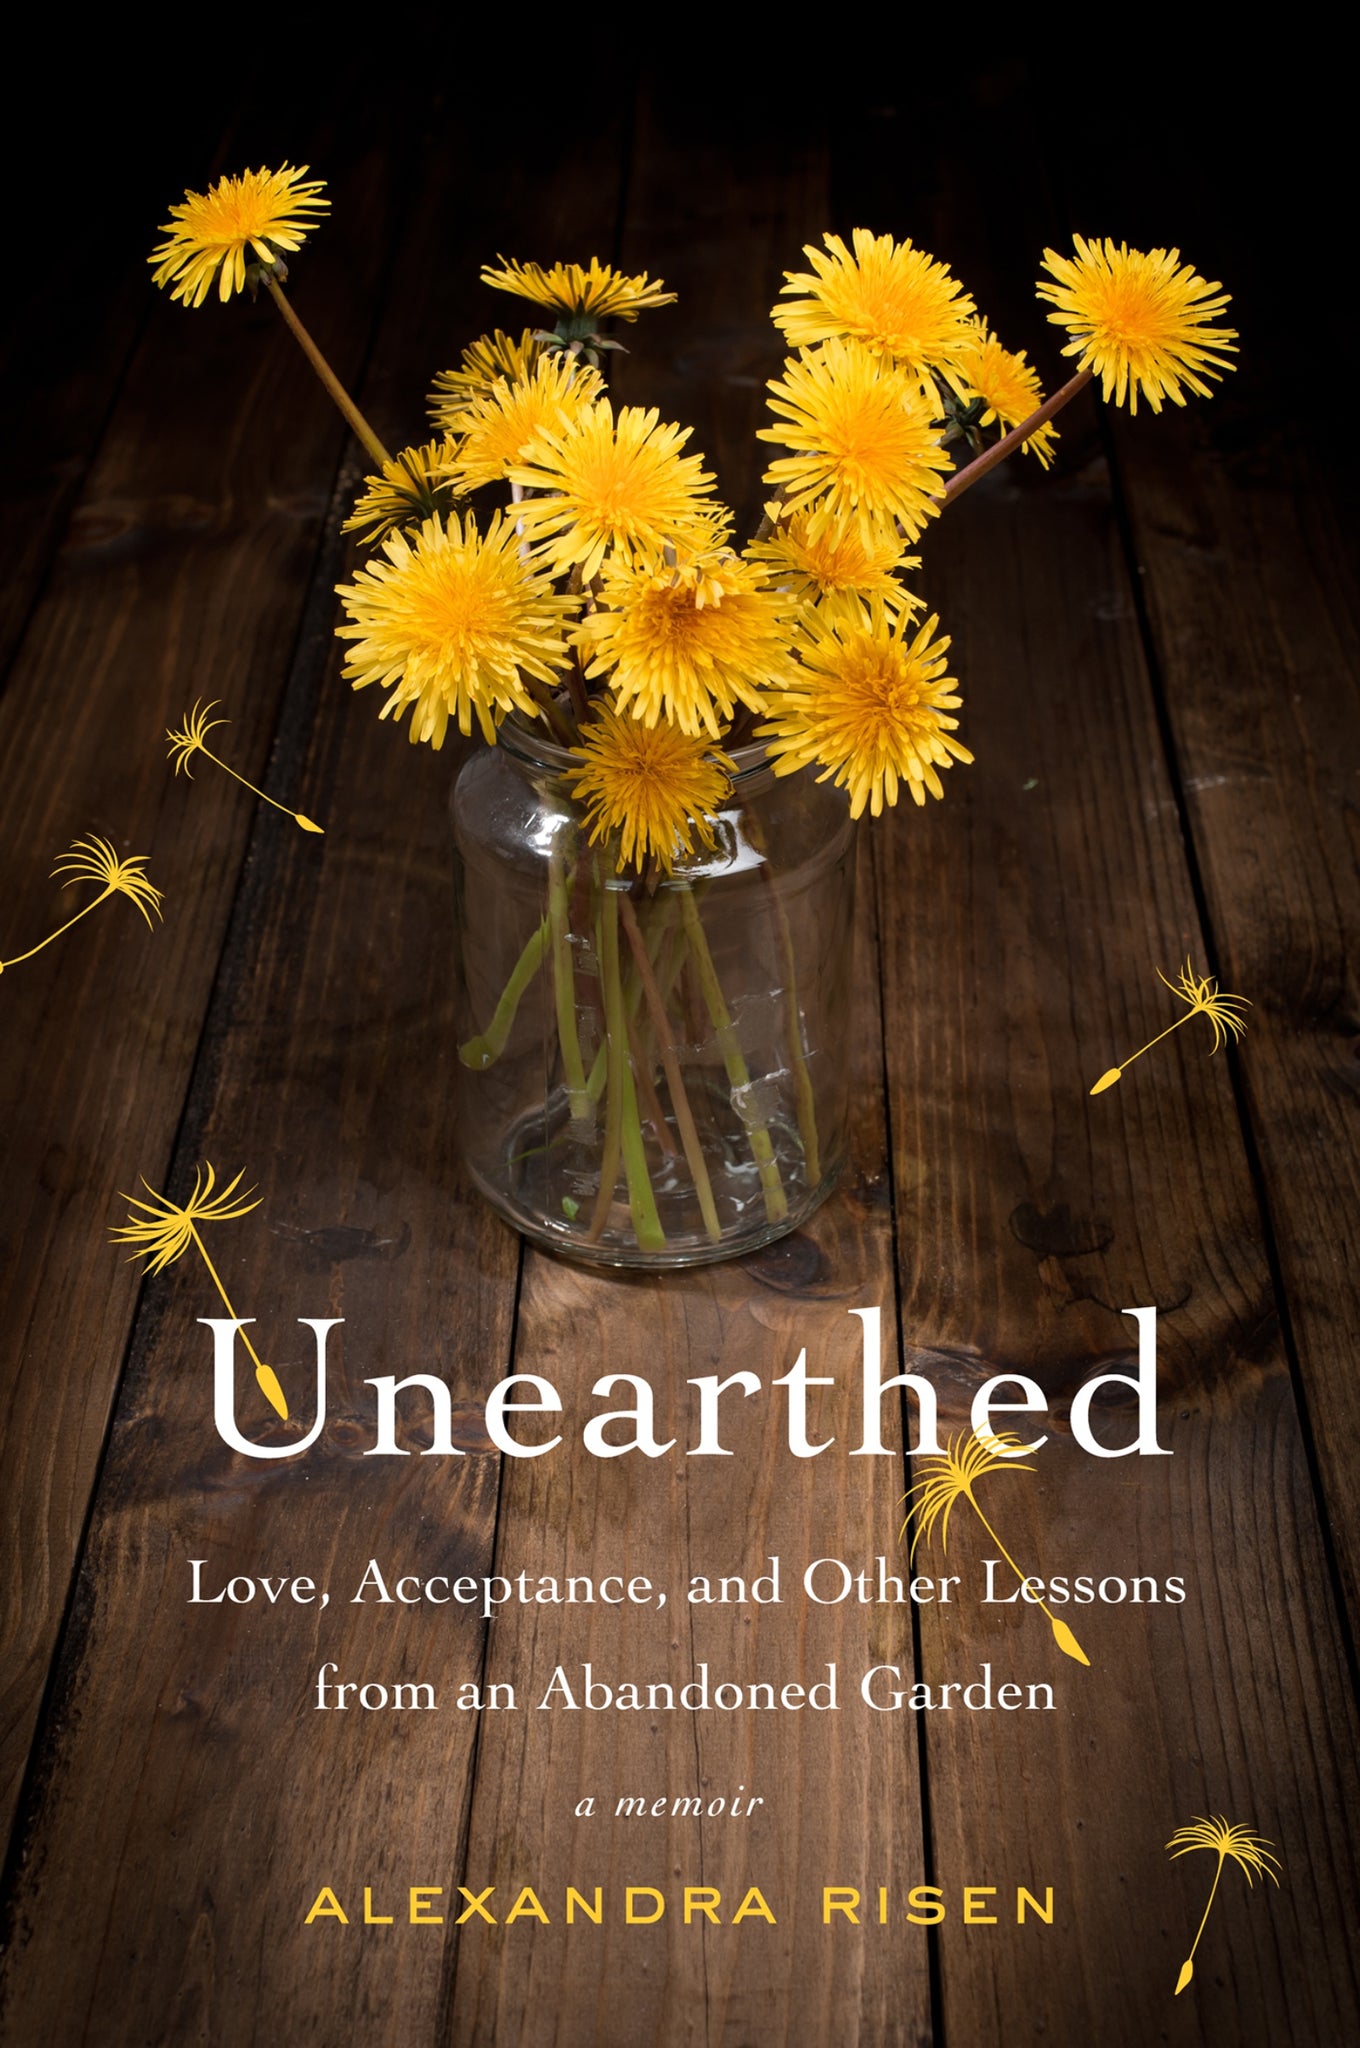 Unearthed : Love, Acceptance, and Other Lessons from an Abandoned Garden